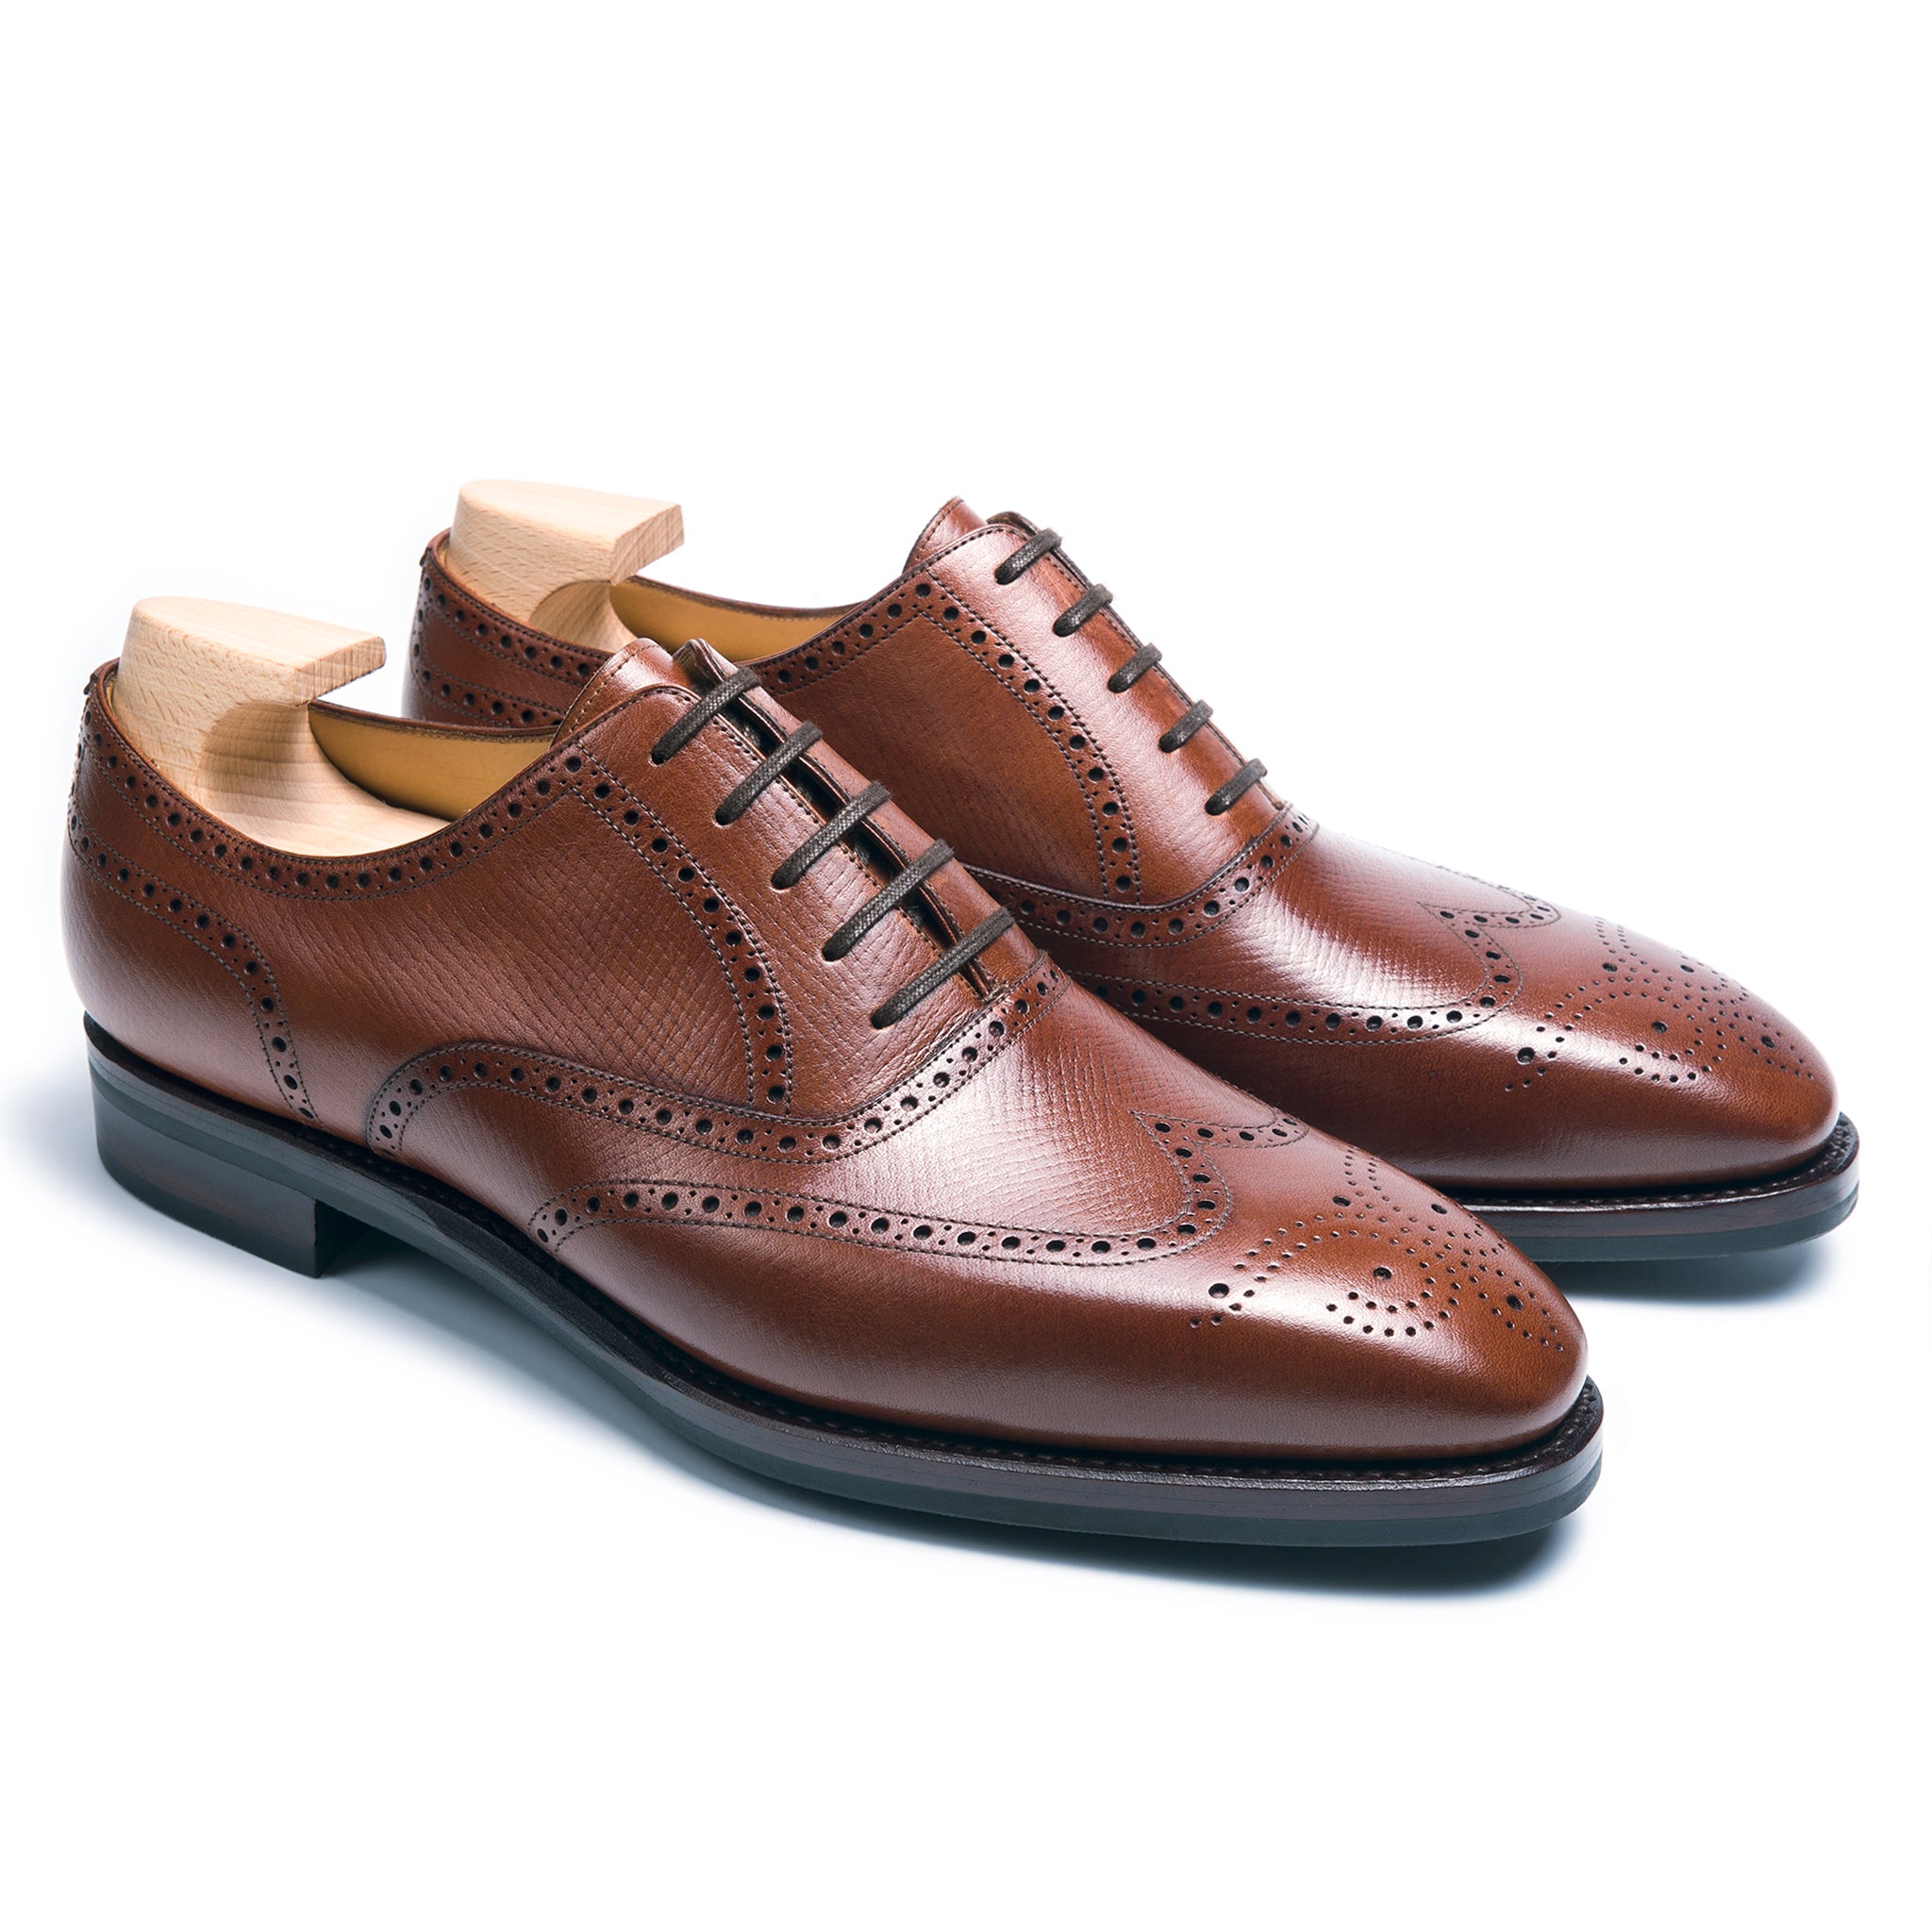 TLB Mallorca | Men's leather shoes | Oxford Shoes Artista Collection ...